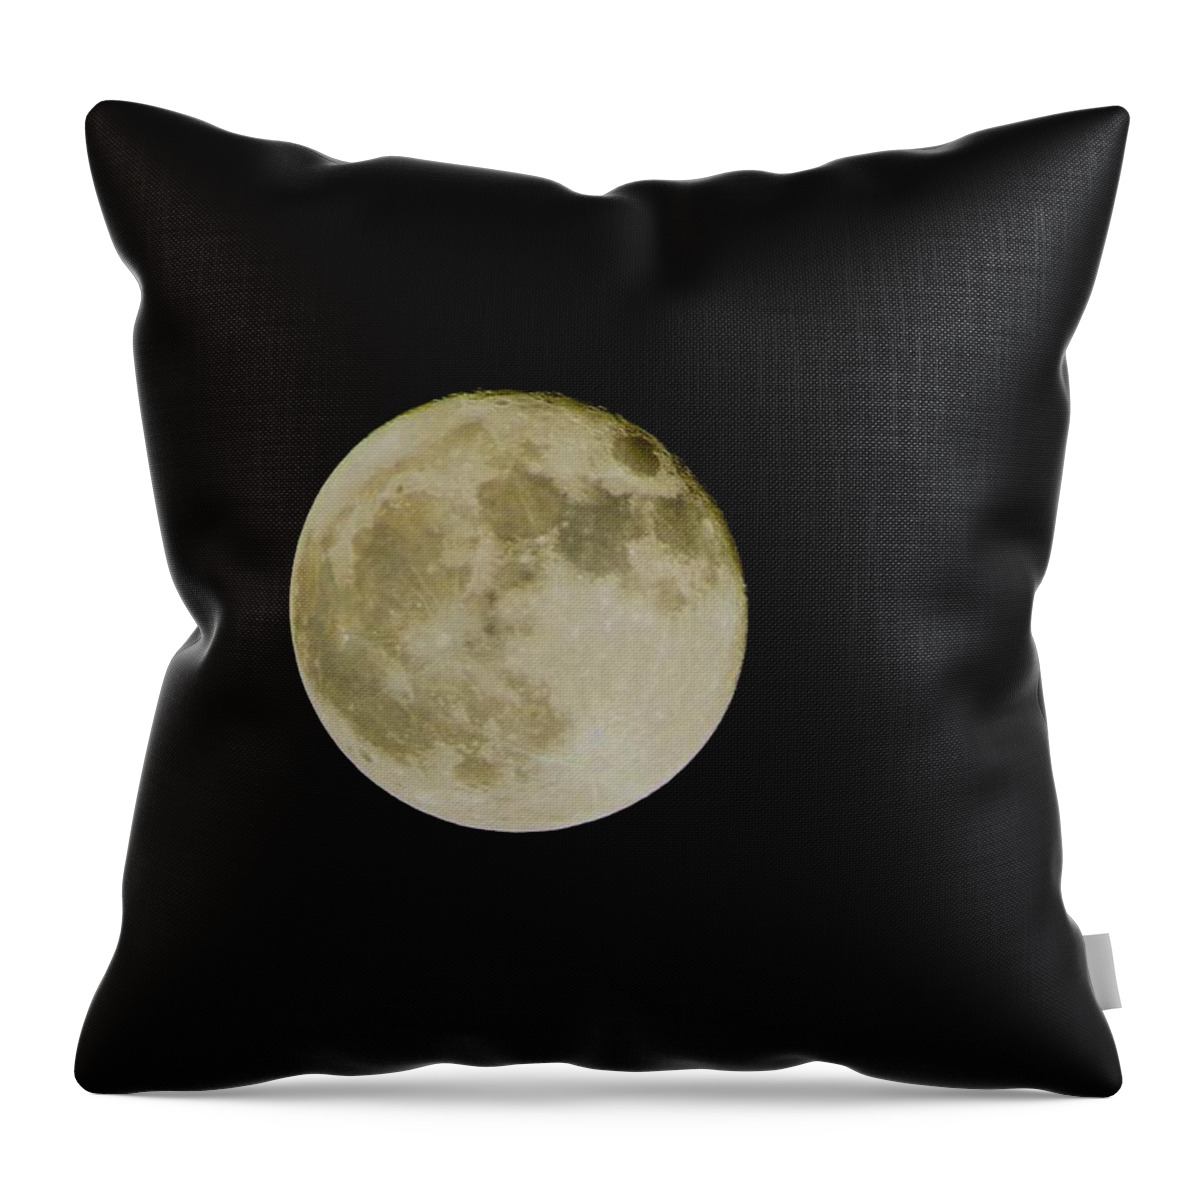 Space Throw Pillow featuring the photograph Moon 1 by Cathy Harper